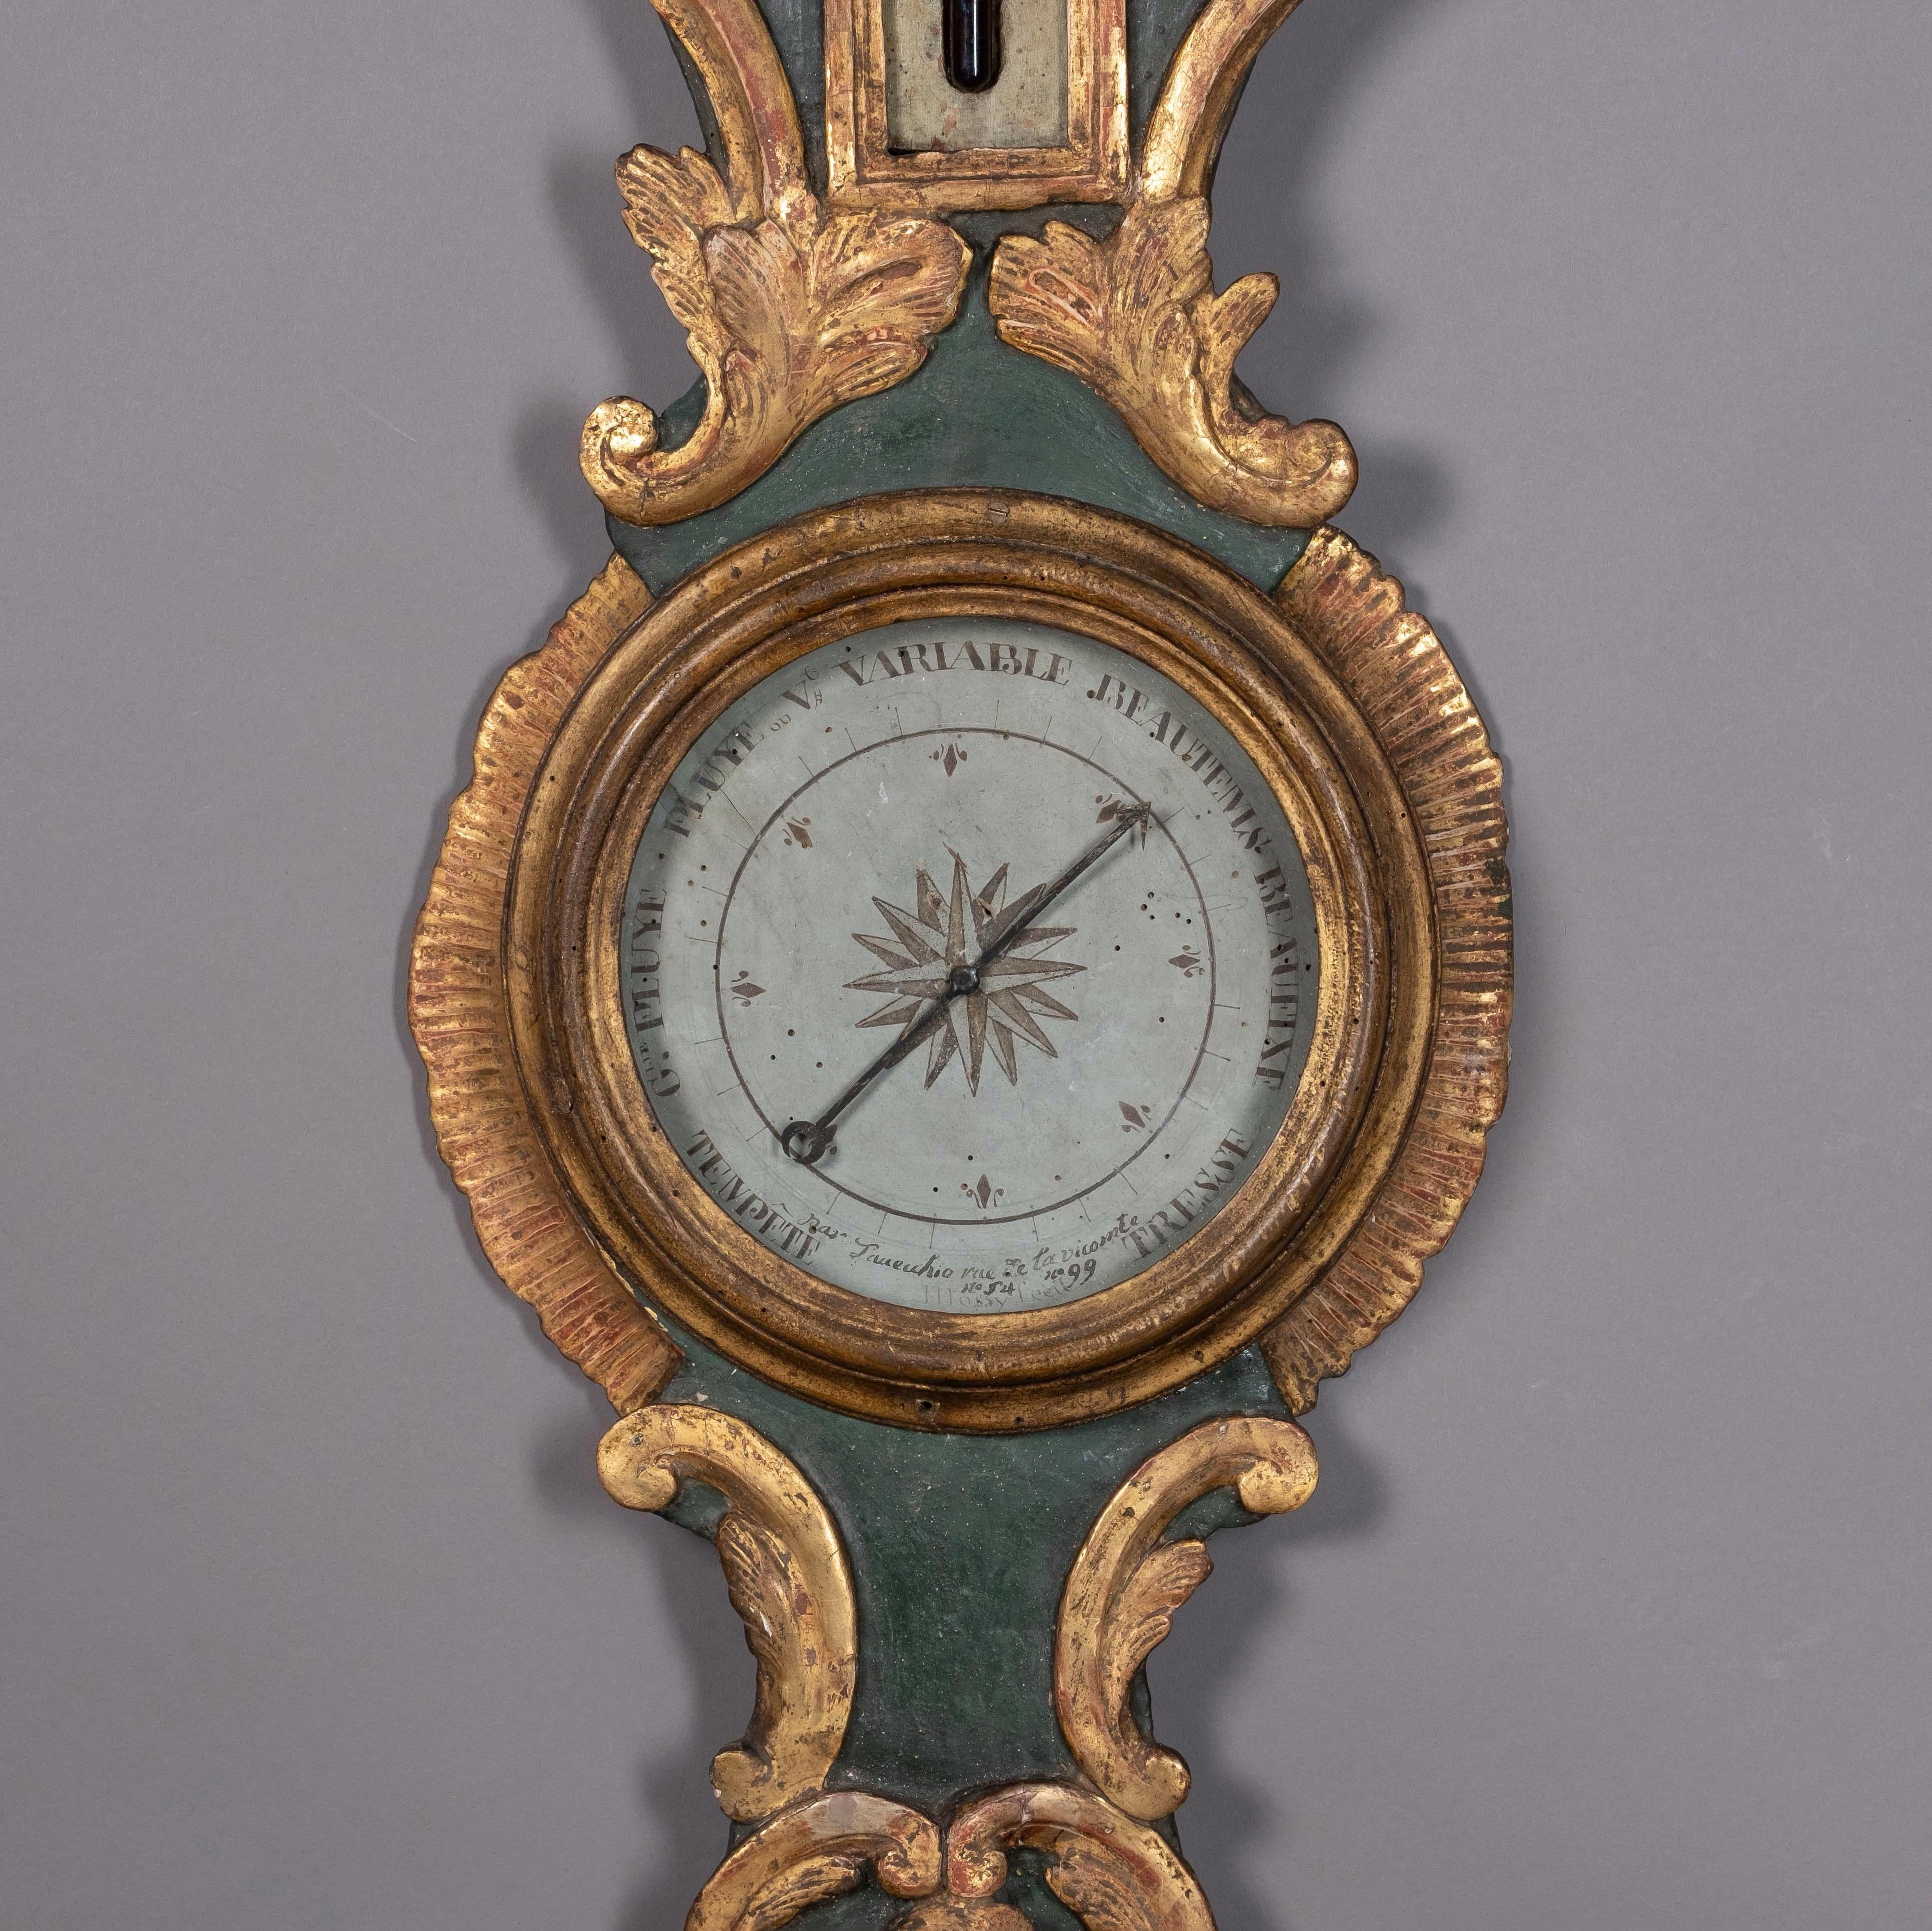 A Louis XV Period parcel gilded barometer of banjo form, the green painted body with carved giltwood rocaille work and C-scrolls throughout, housing a thermometer and weather dial.

The barometer no longer retains its rear mercury glass column and